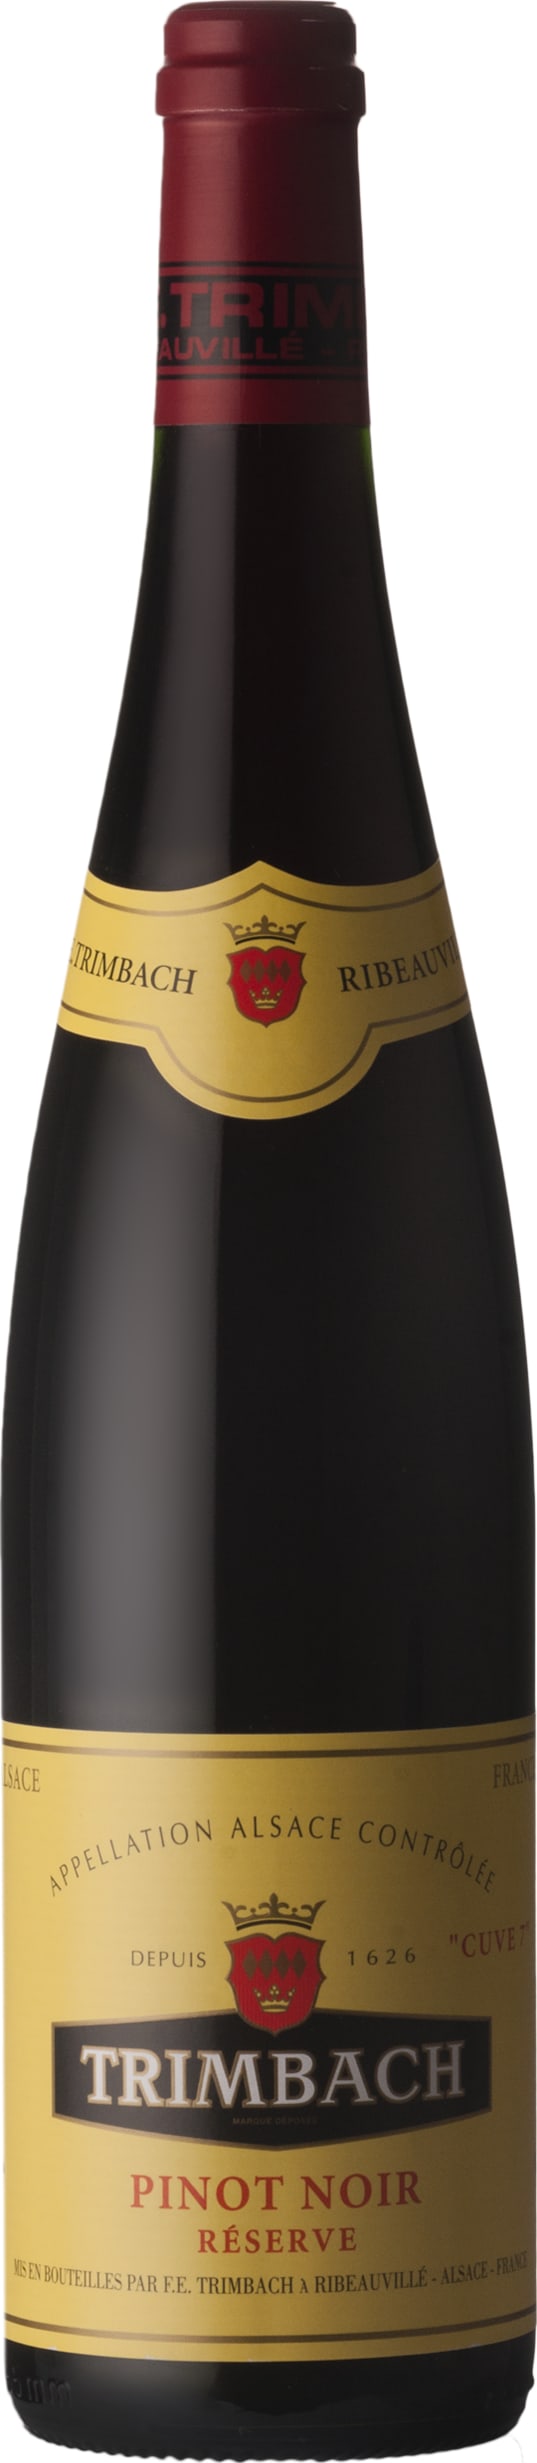 Trimbach Pinot Noir Reserve Cuve 7 2017 75cl - Buy Trimbach Wines from GREAT WINES DIRECT wine shop